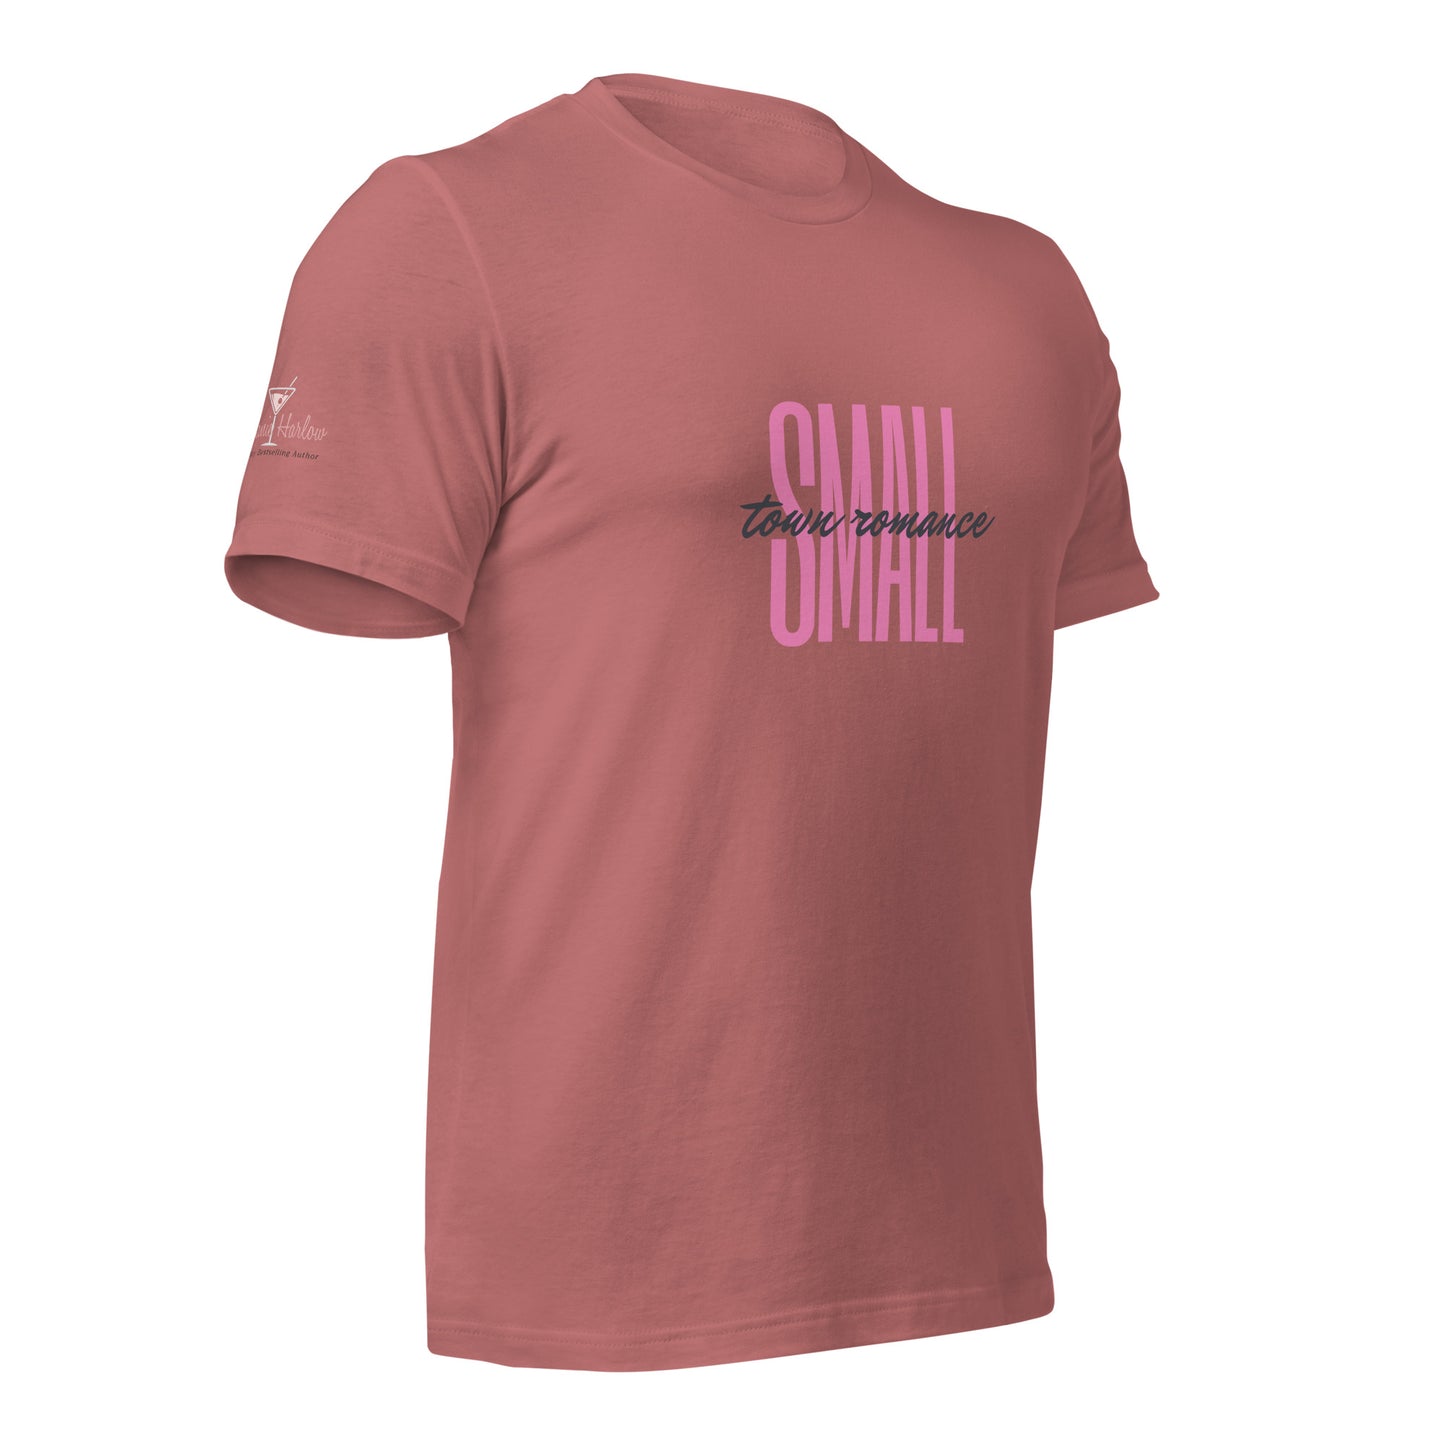 Small Town t-shirt